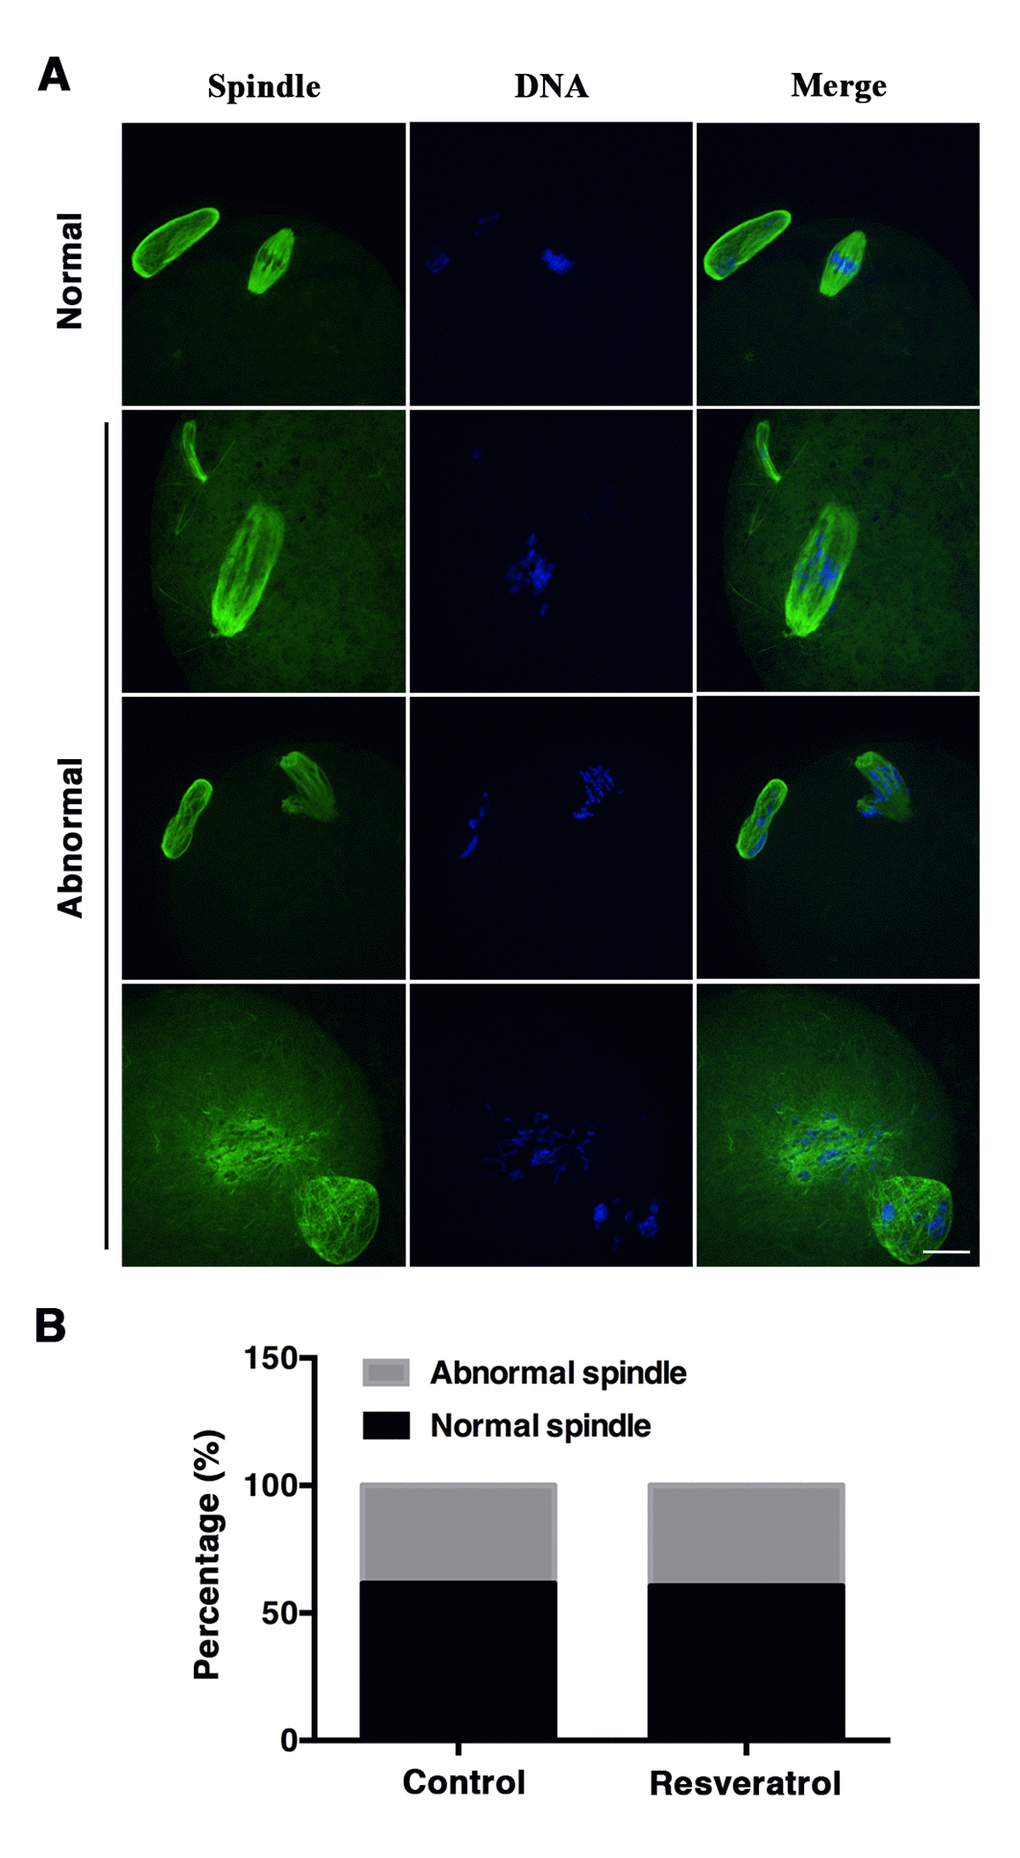 (A) Immunofluorescent images of normal and abnormal spindle morphology of control and resveratrol-treated oocytes. Oocytes were stained with α-tubulin antibody (green) and Hoechst (blue) to show spindle morphology and chromosome alignment, respectively. Scale bar: 20 μm. (B) Proportions of the normal and abnormal spindle morphology of aging MII oocytes from control and resveratrol-treated groups. Data are expressed as mean ± SEM of at least 5 independent experiments.